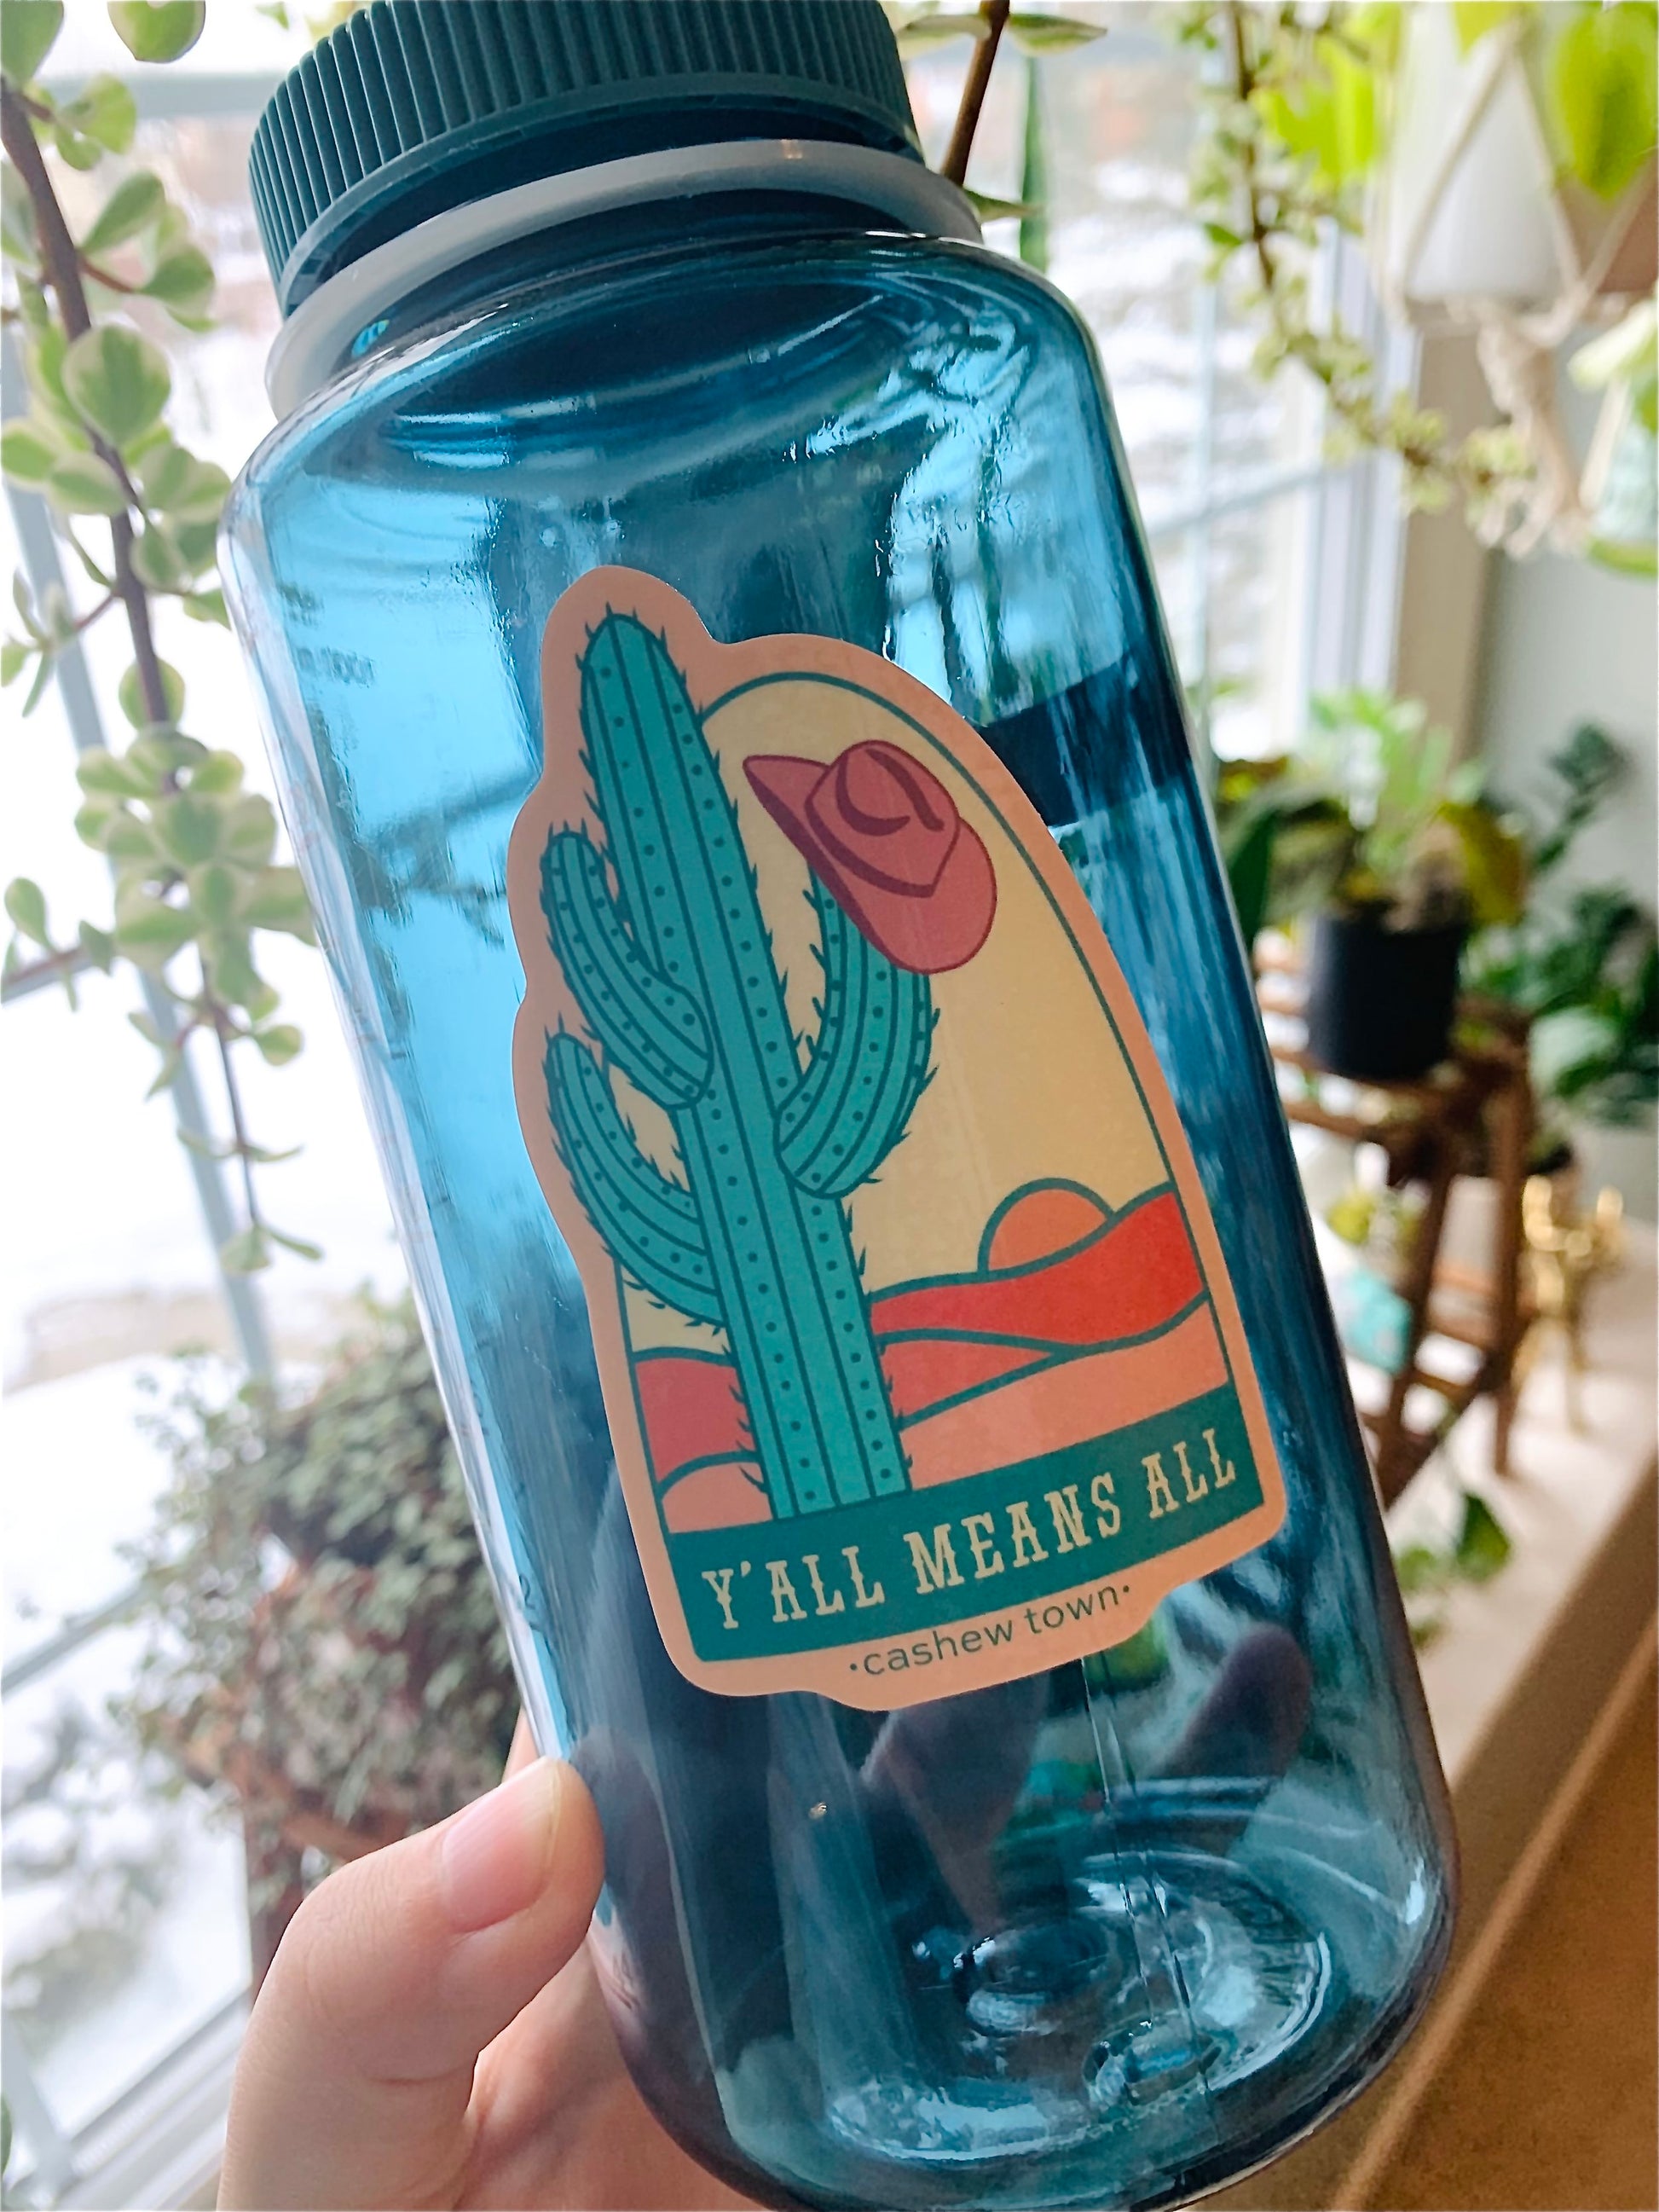 Our Y'all Means All sticker featured on a blue nalgene water bottle taken in front of houseplants on a window sill.